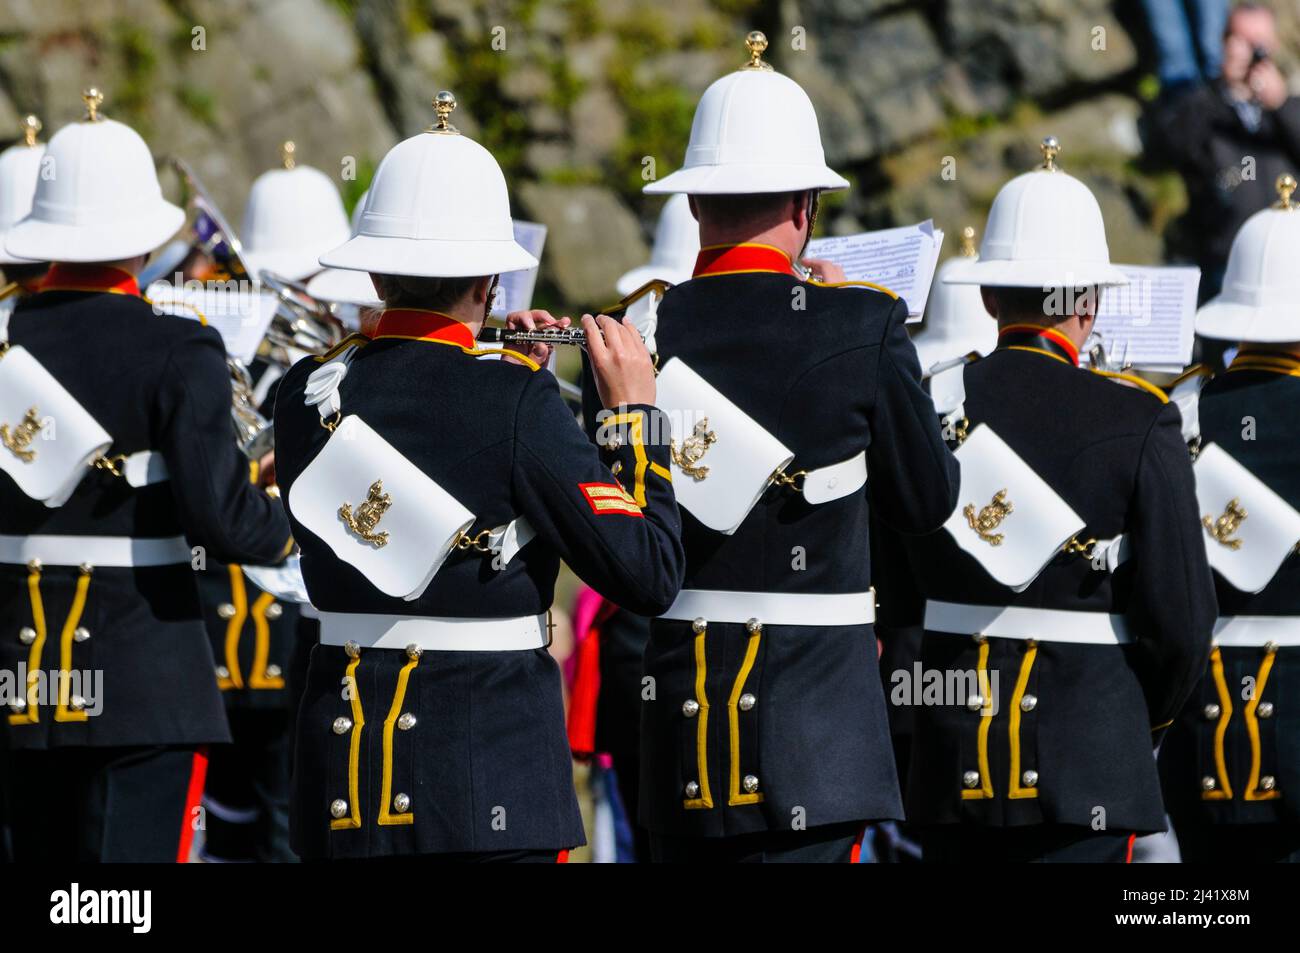 Carrickfergus, Northern Ireland. 30th July 2012. Royal Marines band perform at Armed Forces Day Stock Photo